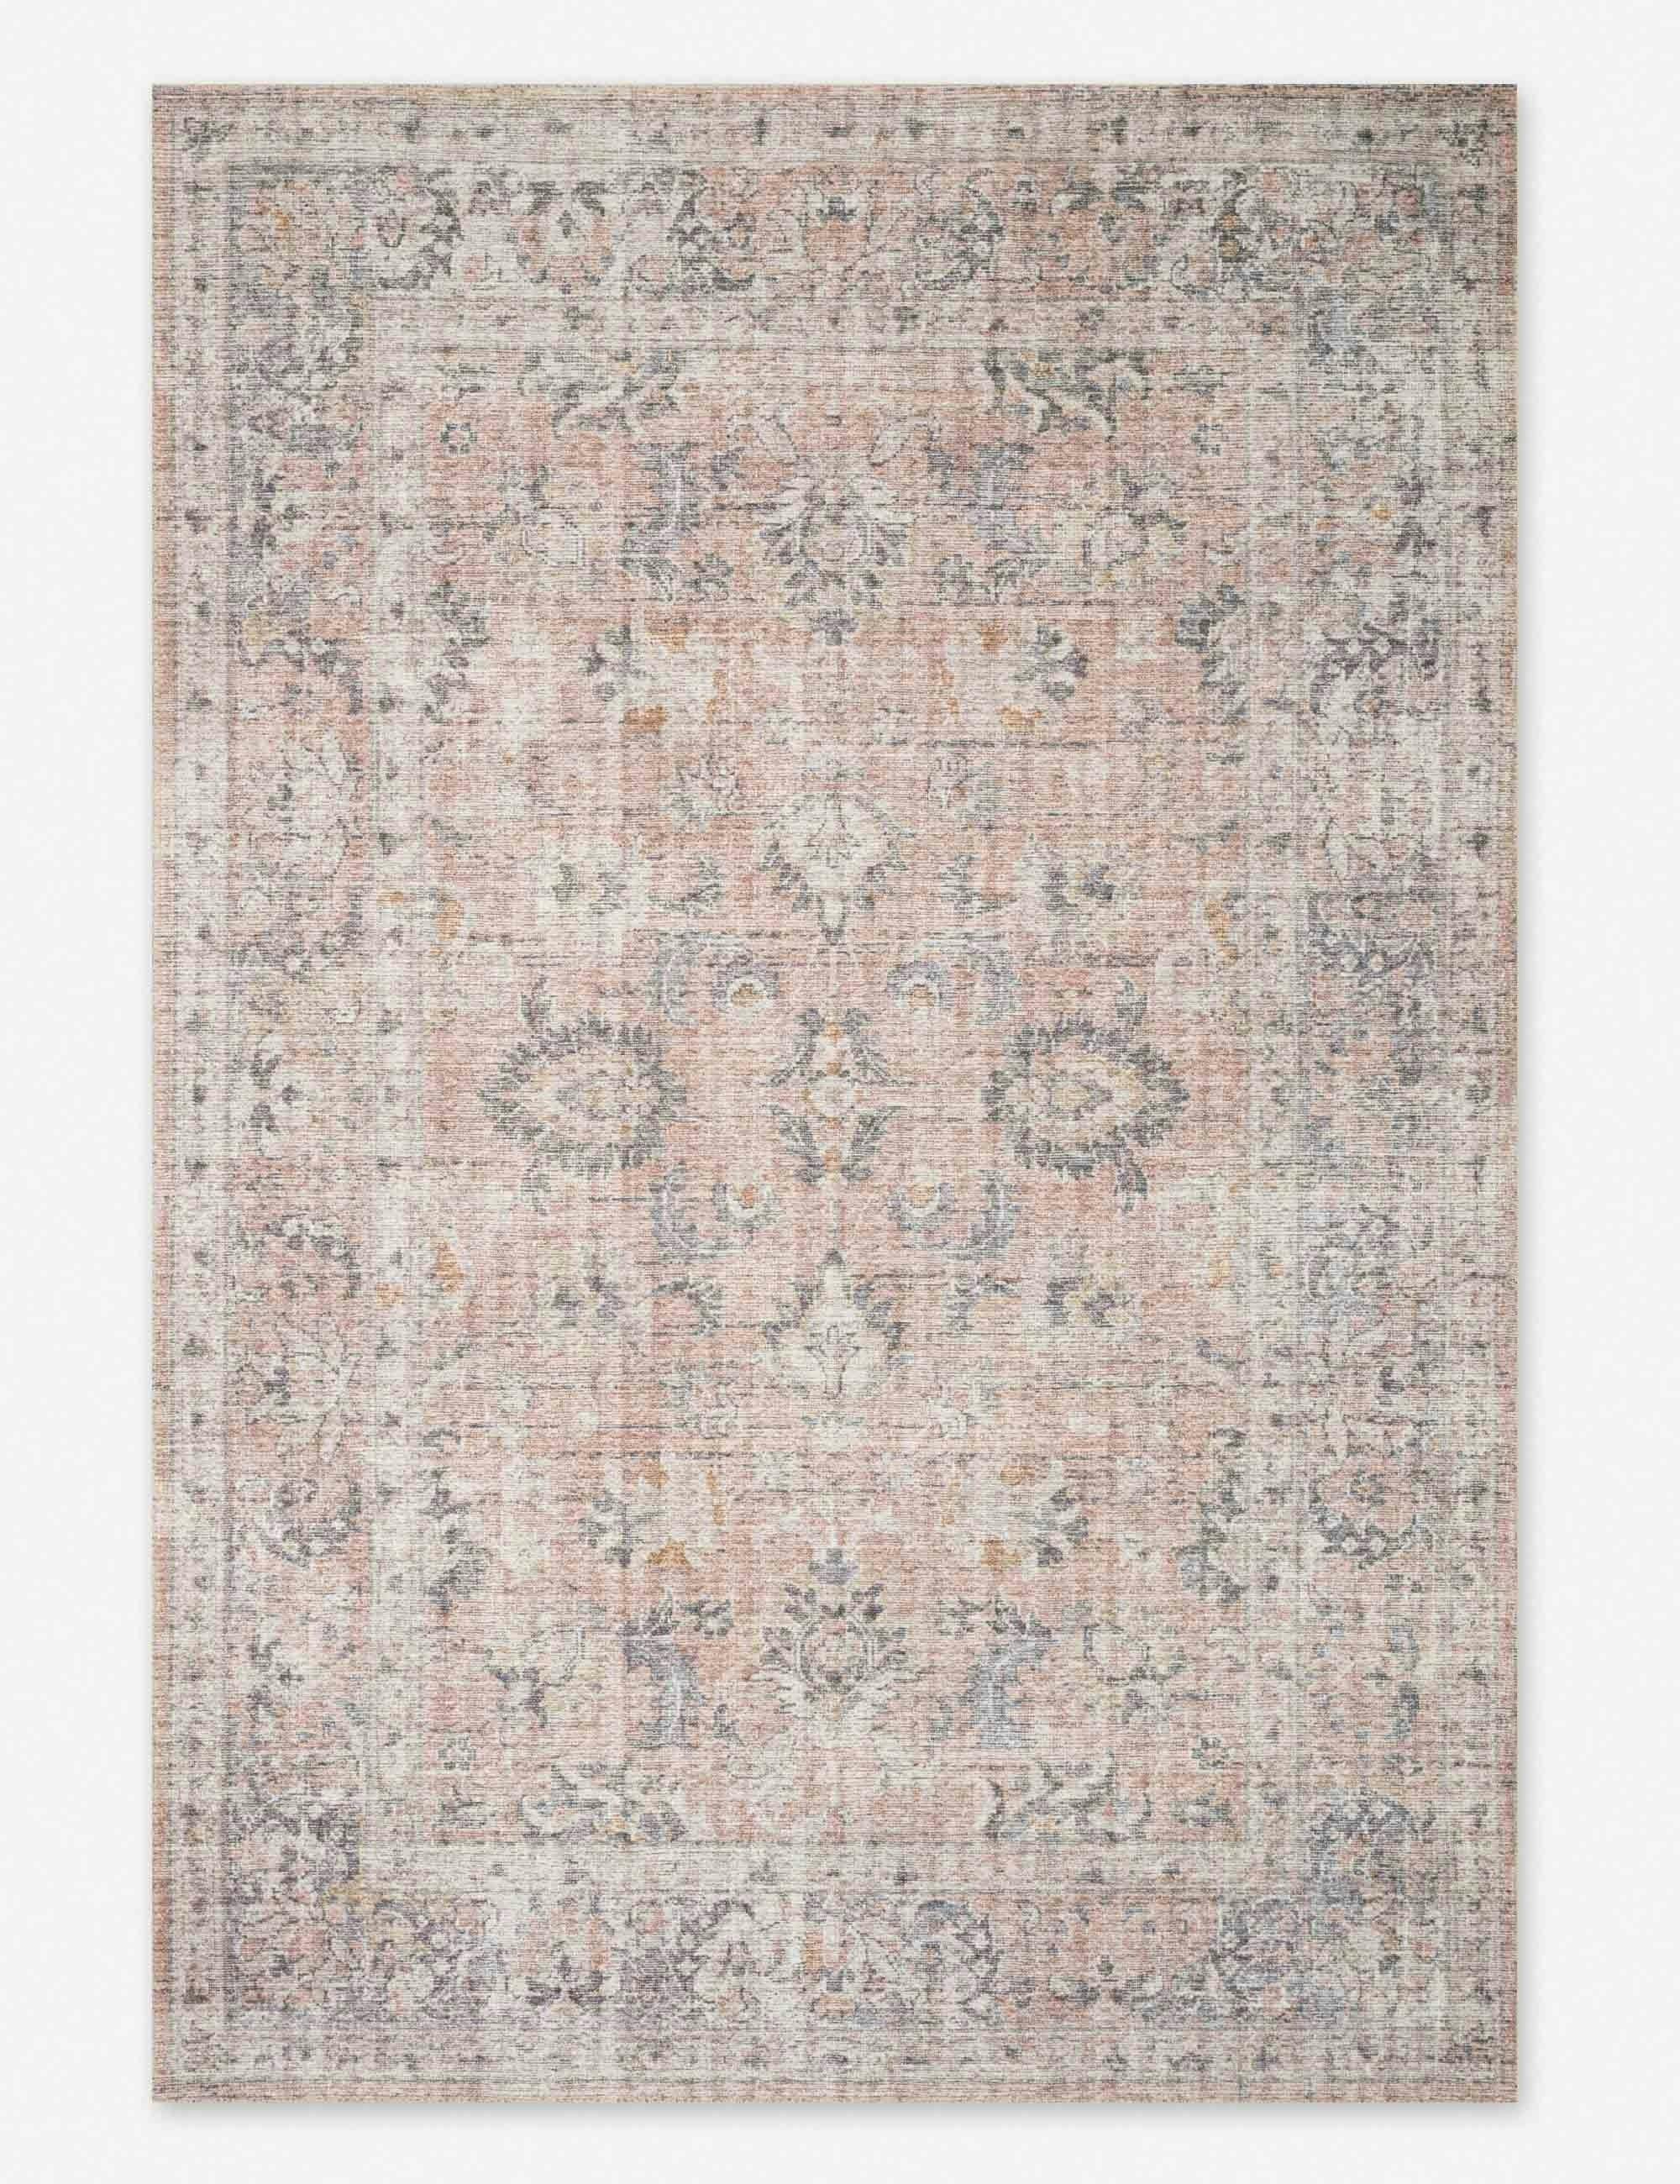 Roze Rug - Blush and Grey / 7'6" x 9'6"